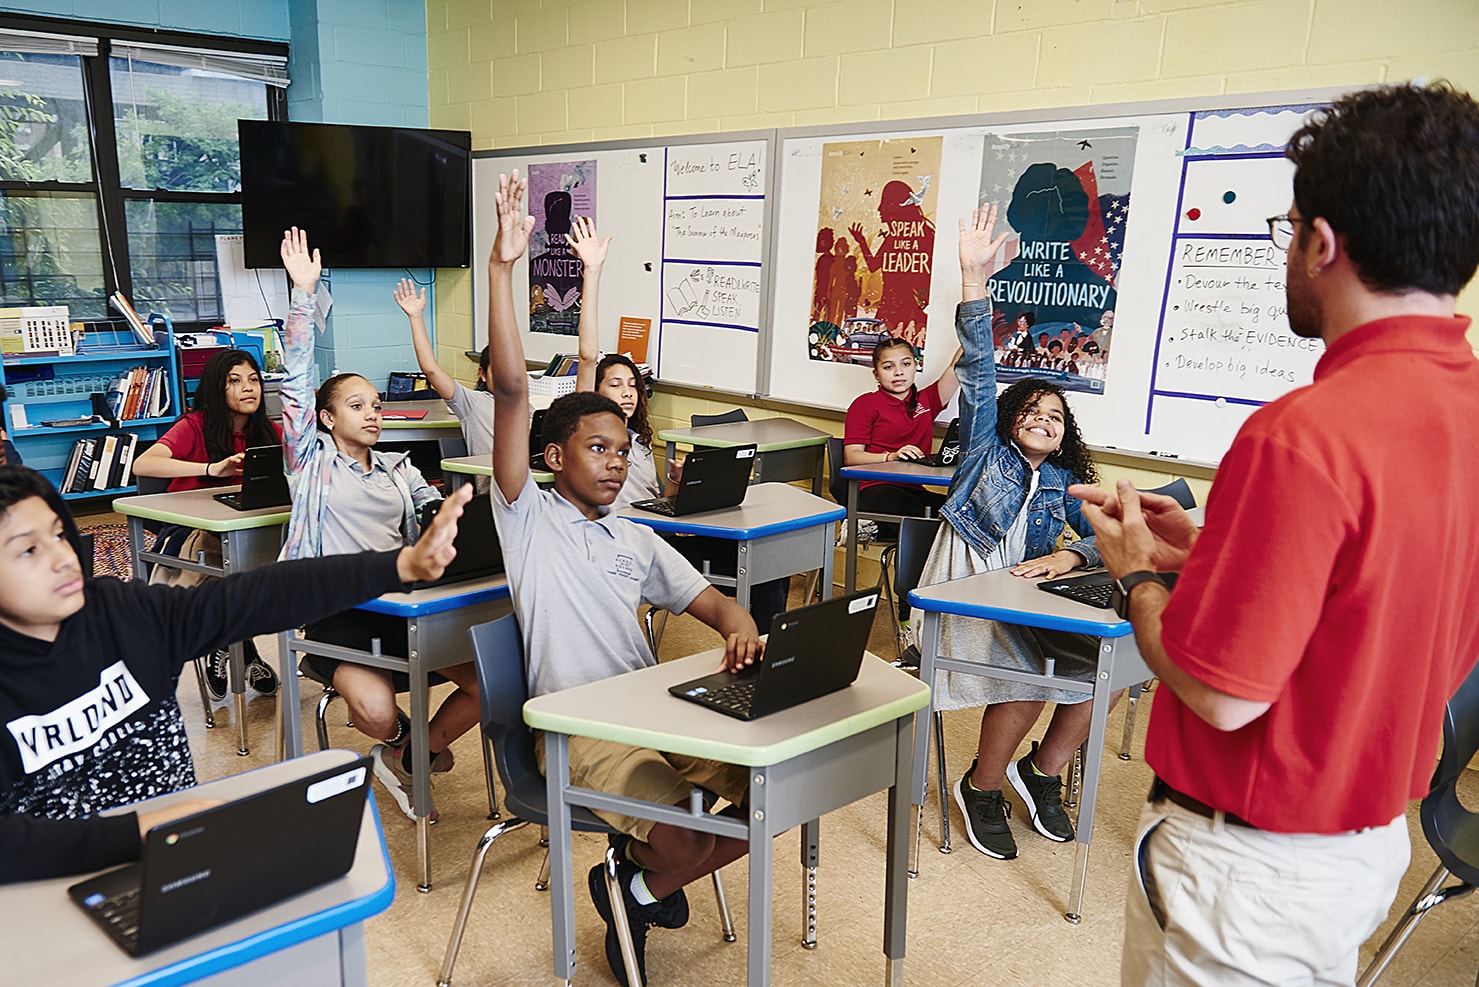 A diverse group of students raising their hands in a classroom, engaging with a male teacher who is standing in front of them.